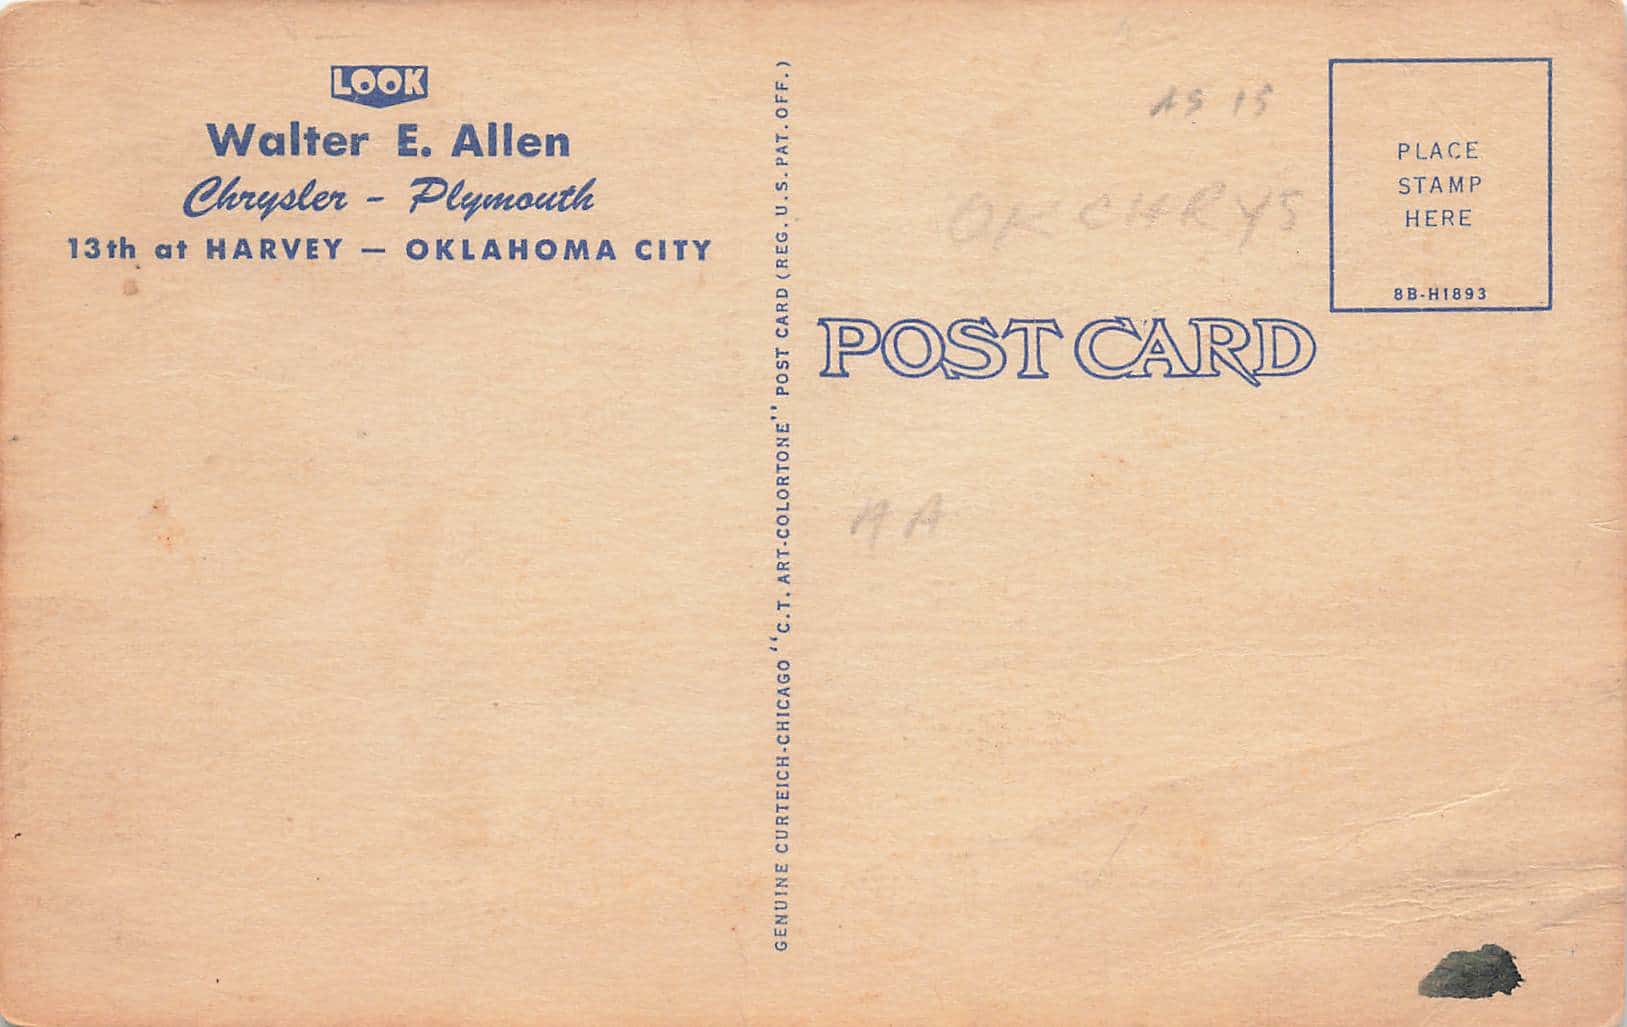 A postcard featuring Walter E. Allen and the logo of Chrysler Plymouth, located in Oklahoma City.